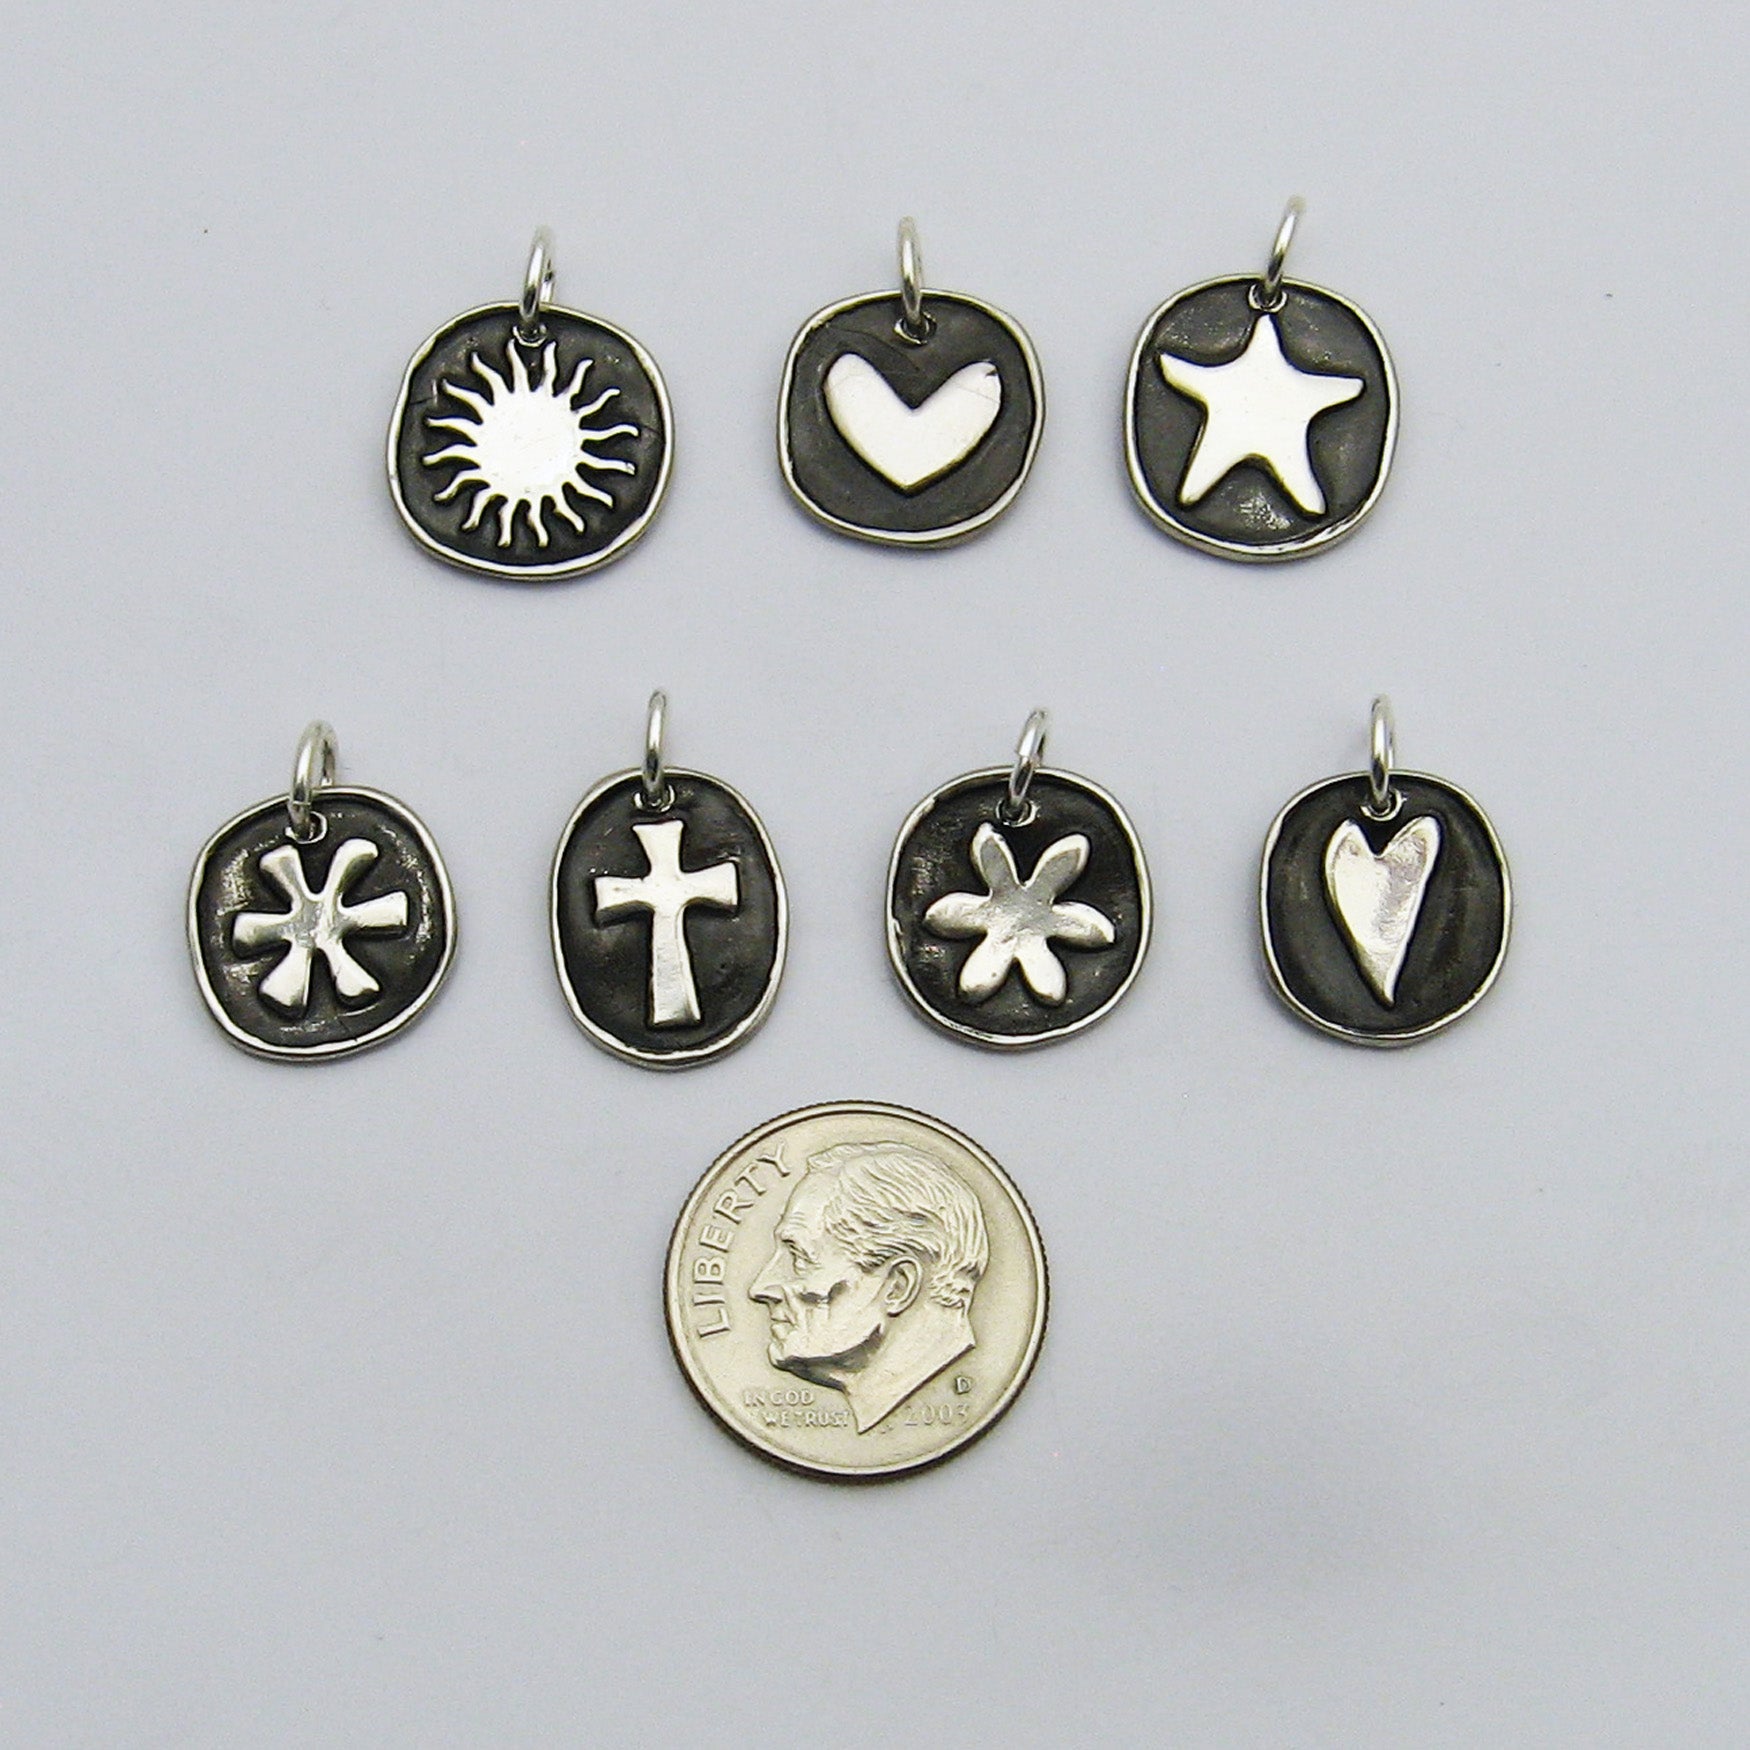 Sterling Silver Symbolic Charms Sun, Heart, Starfish, Asterisk, Cross, Flower, Long Heart With Dime for Size Reference